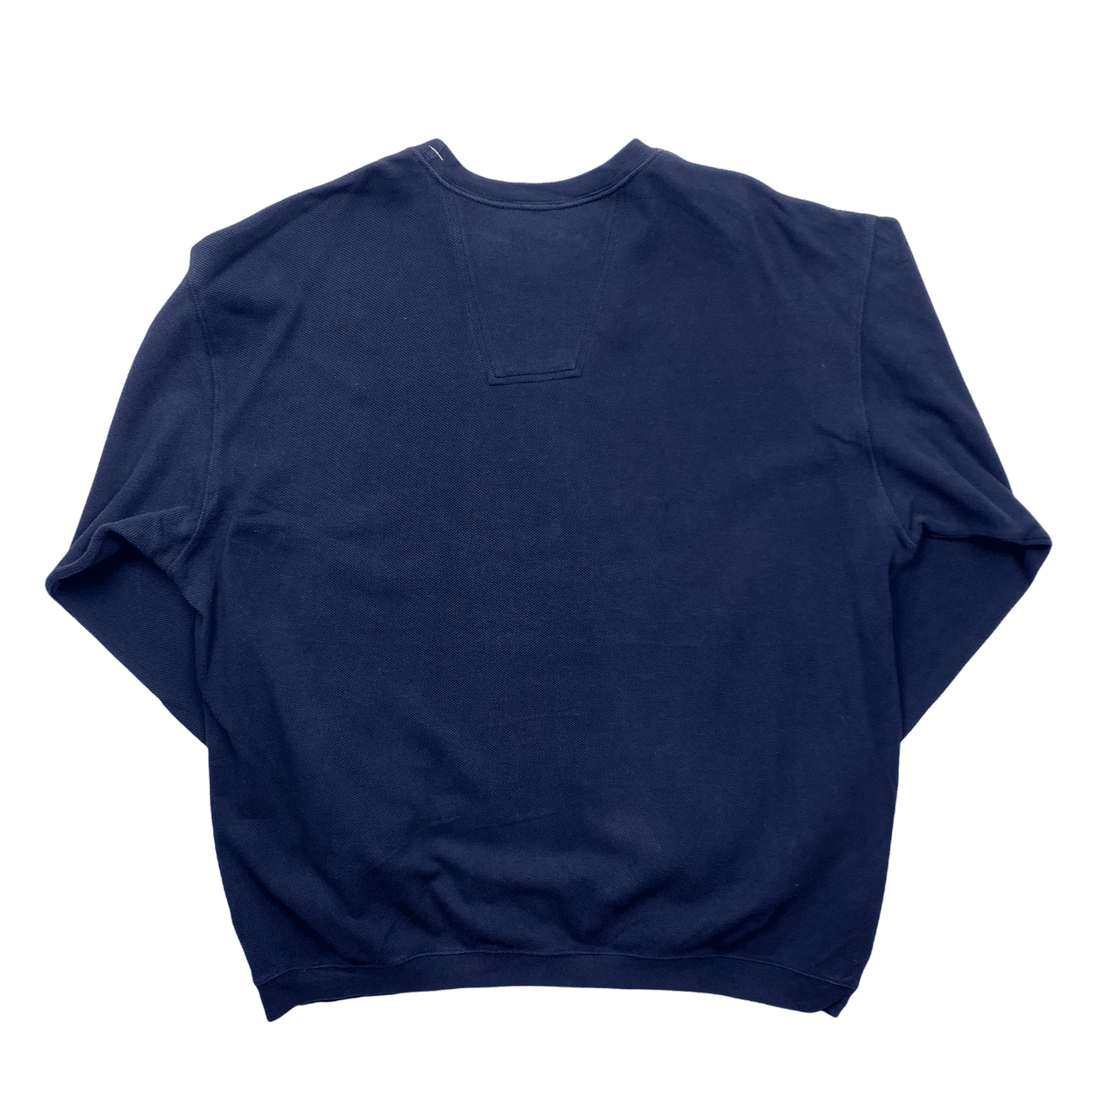 Vintage 90s Navy Blue Adidas Equipment Spell-Out Sweatshirt - Extra Large - The Streetwear Studio